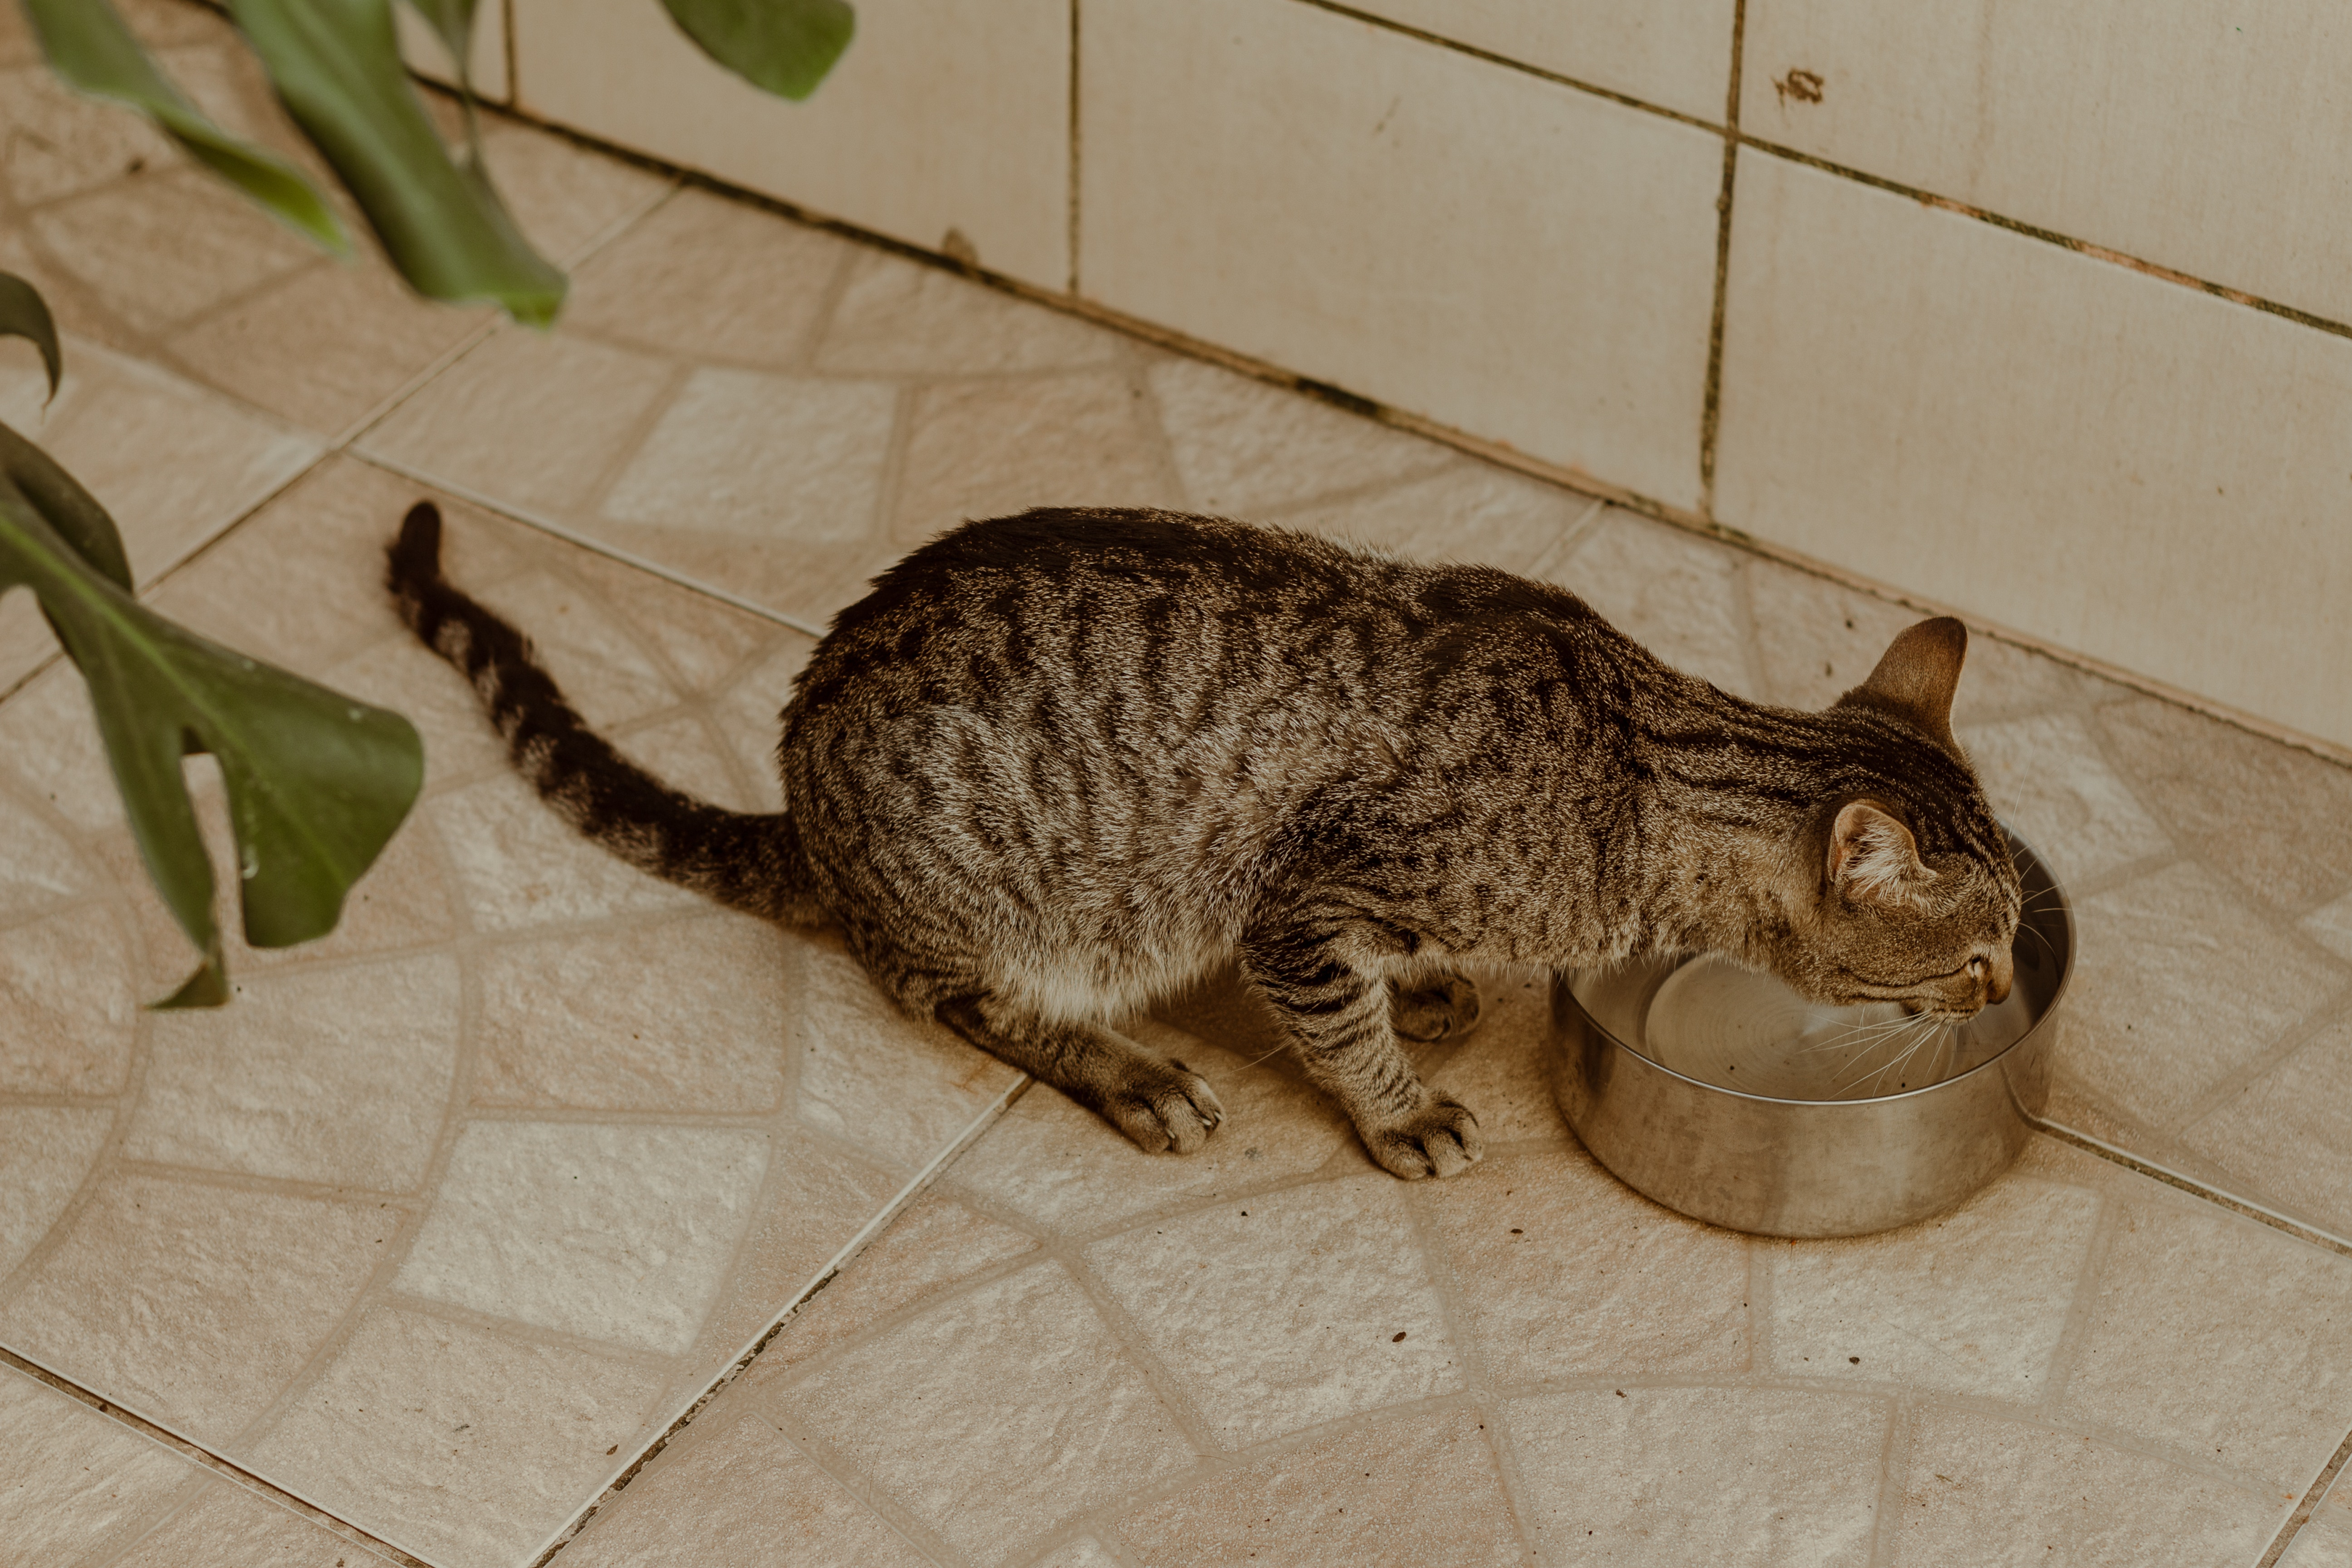 Source: https://www.pexels.com/photo/brown-tabby-cat-drinking-water-from-stainless-steel-bowl-11577768/